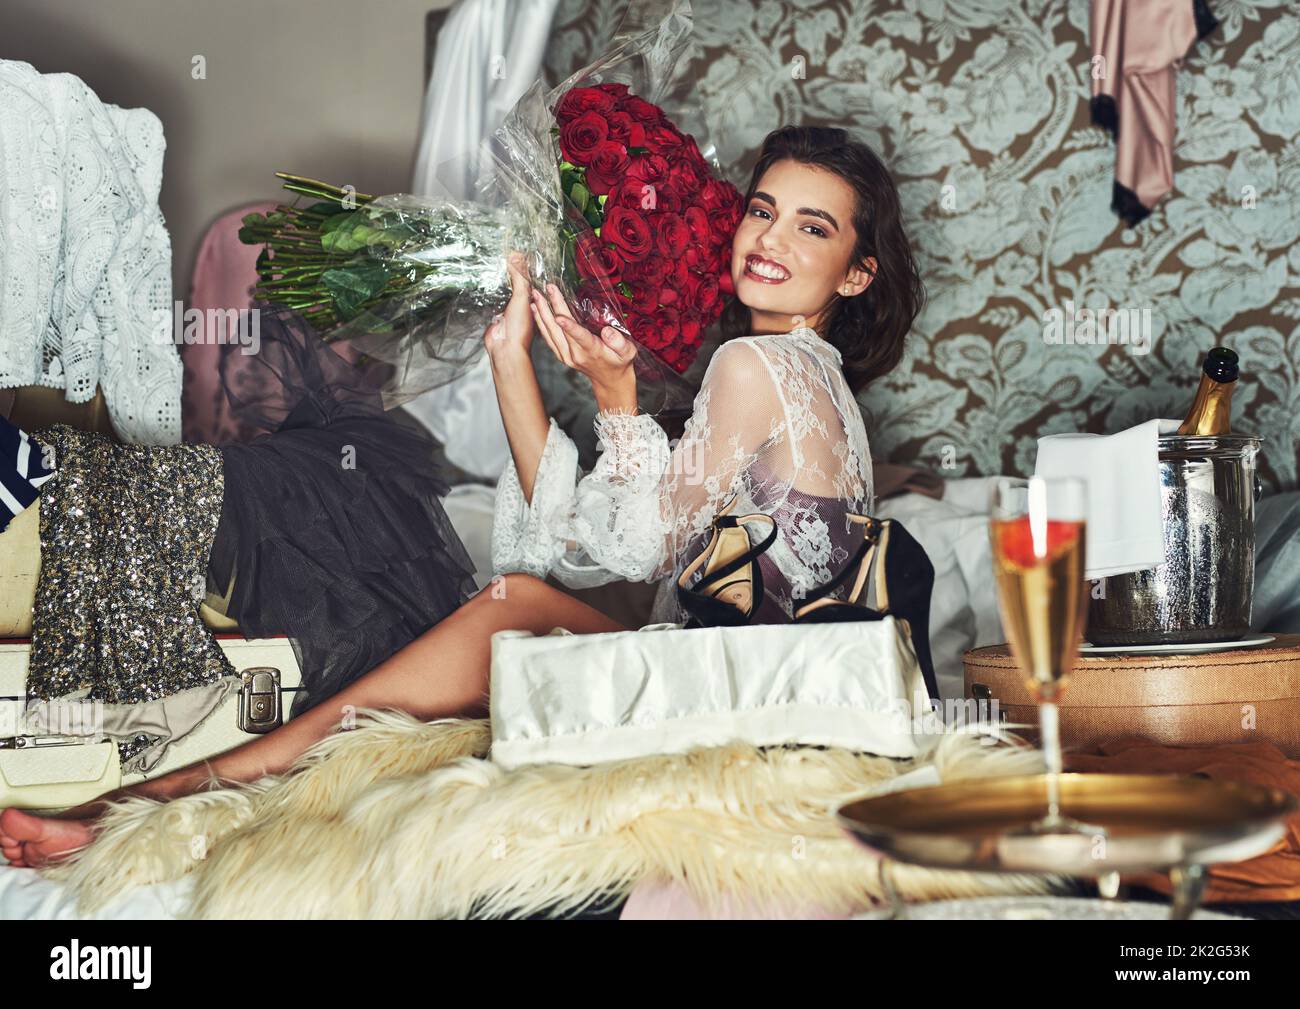 Flowers always puts me in a good mood. Portrait of a beautiful young woman relaxing on her bed and being surrounded by gifts while holding a bouquet of roses. Stock Photo